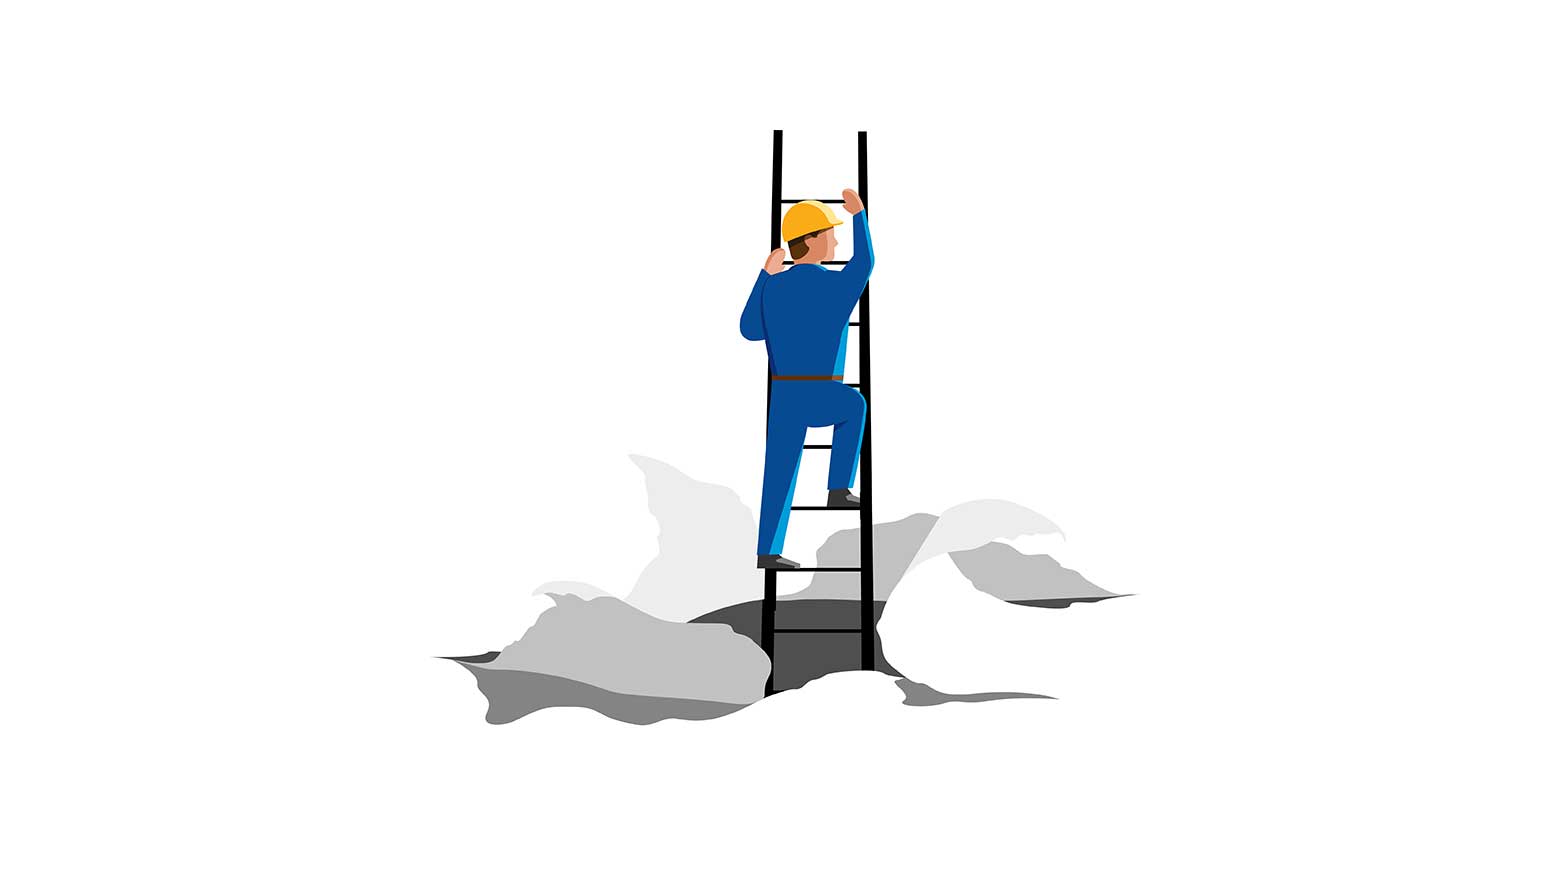 image of a person climbing a ladder